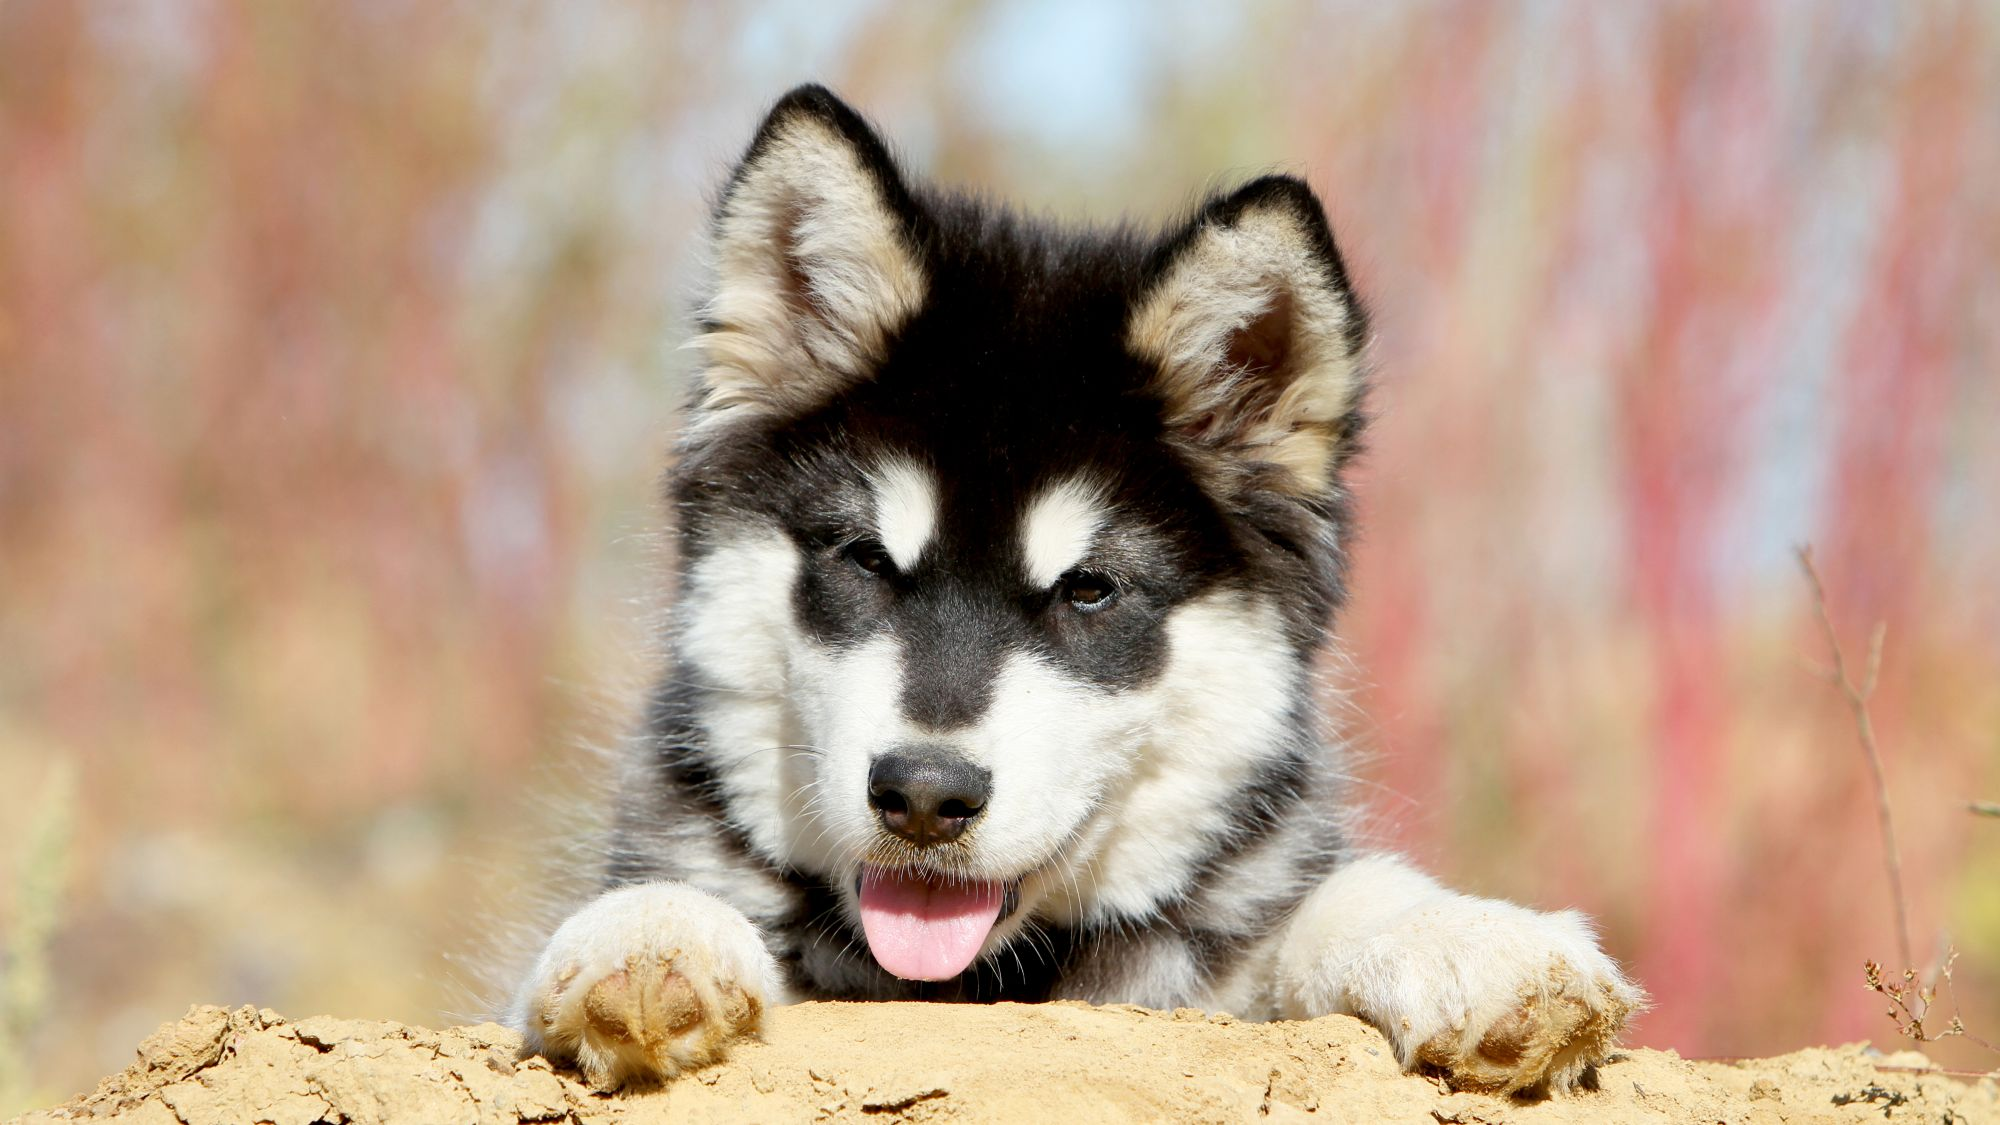 Alaskan Malamute puppy peering over a mound of mud